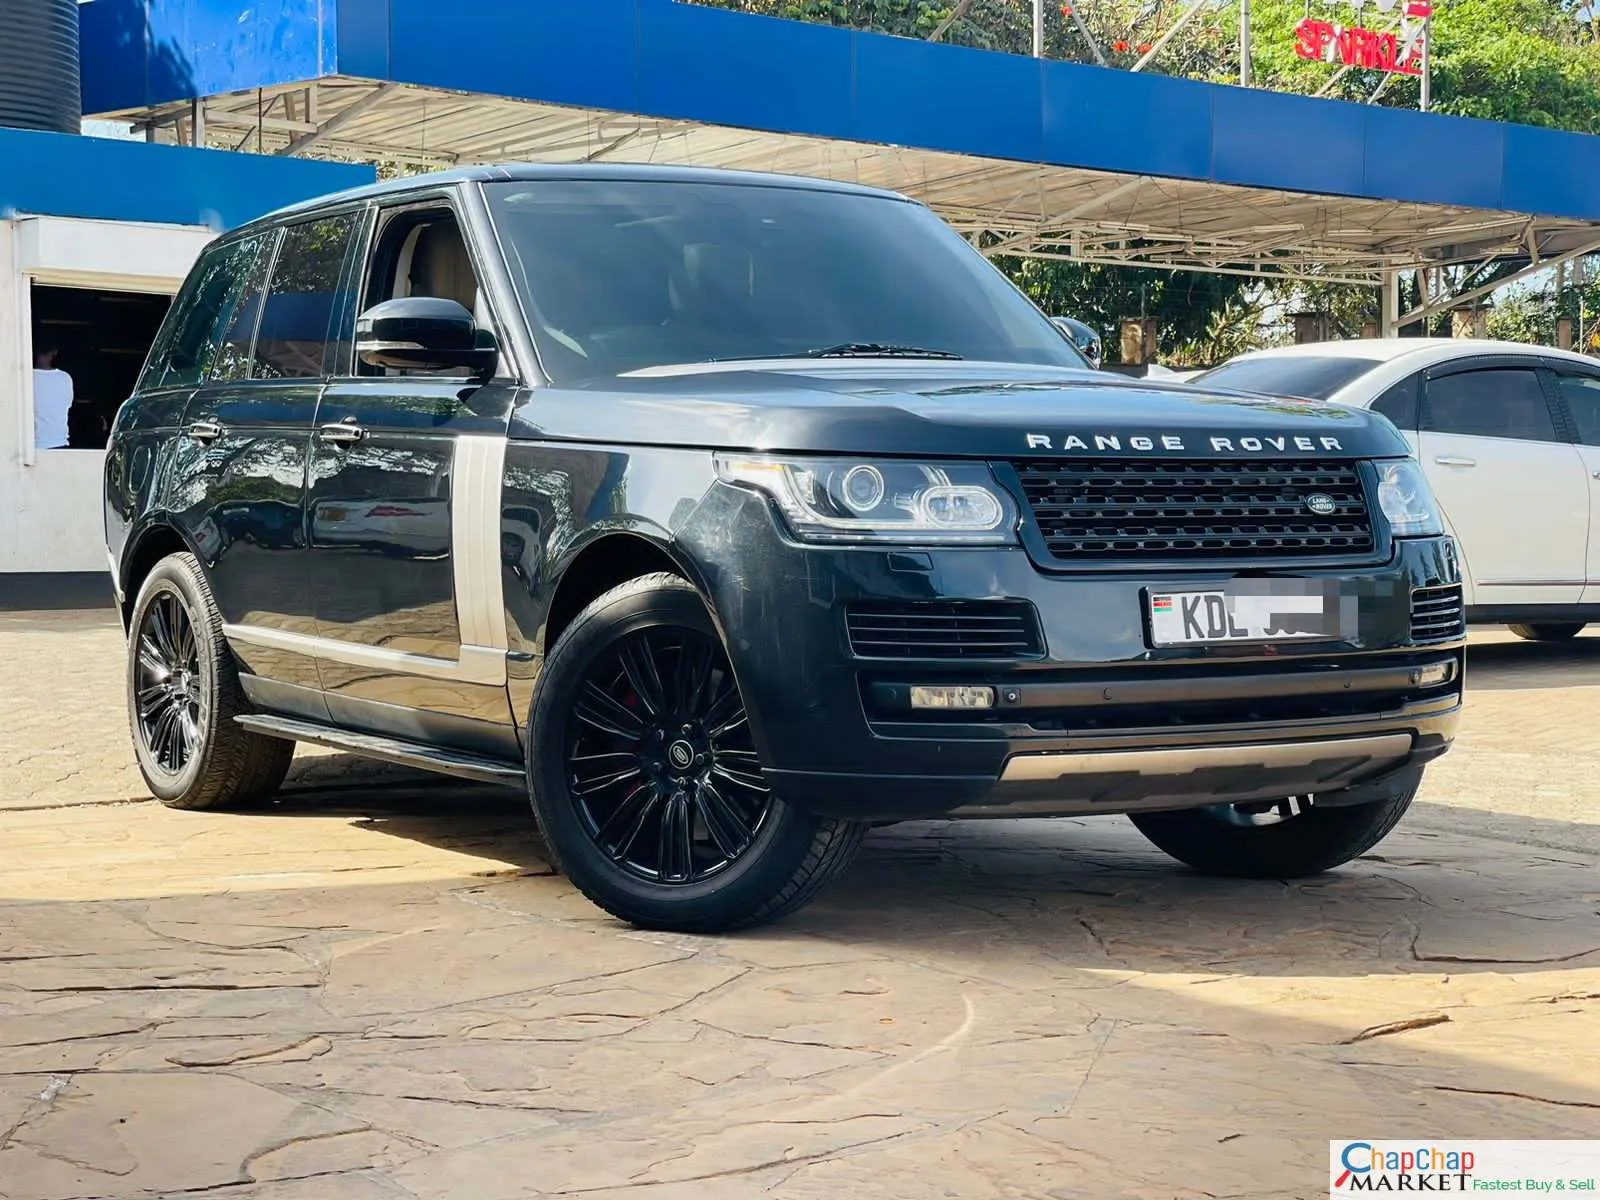 Cars Cars For Sale-RANGE ROVER VOGUE Autobiography 4.4 SDV8 QUICK SALE For sale in kenya exclusive vogue autobiography for sale in kenya hire purchase installments 7